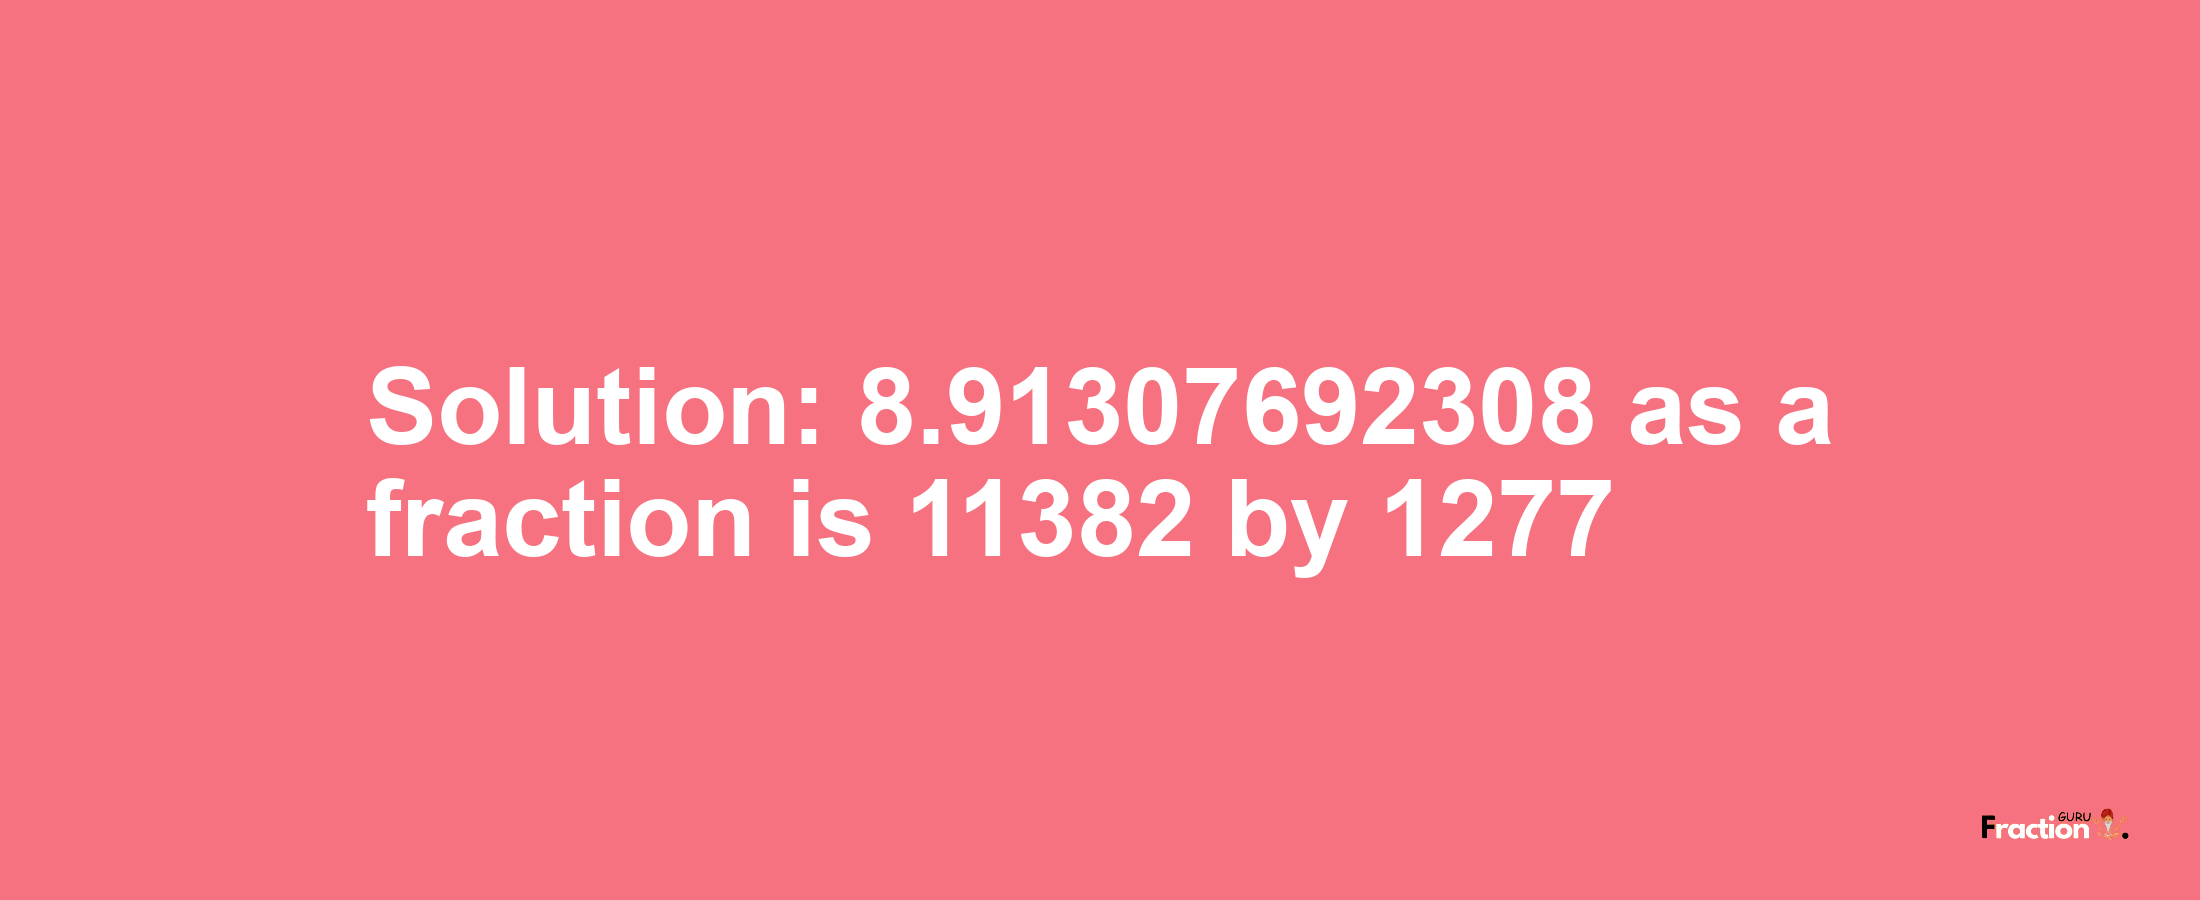 Solution:8.91307692308 as a fraction is 11382/1277